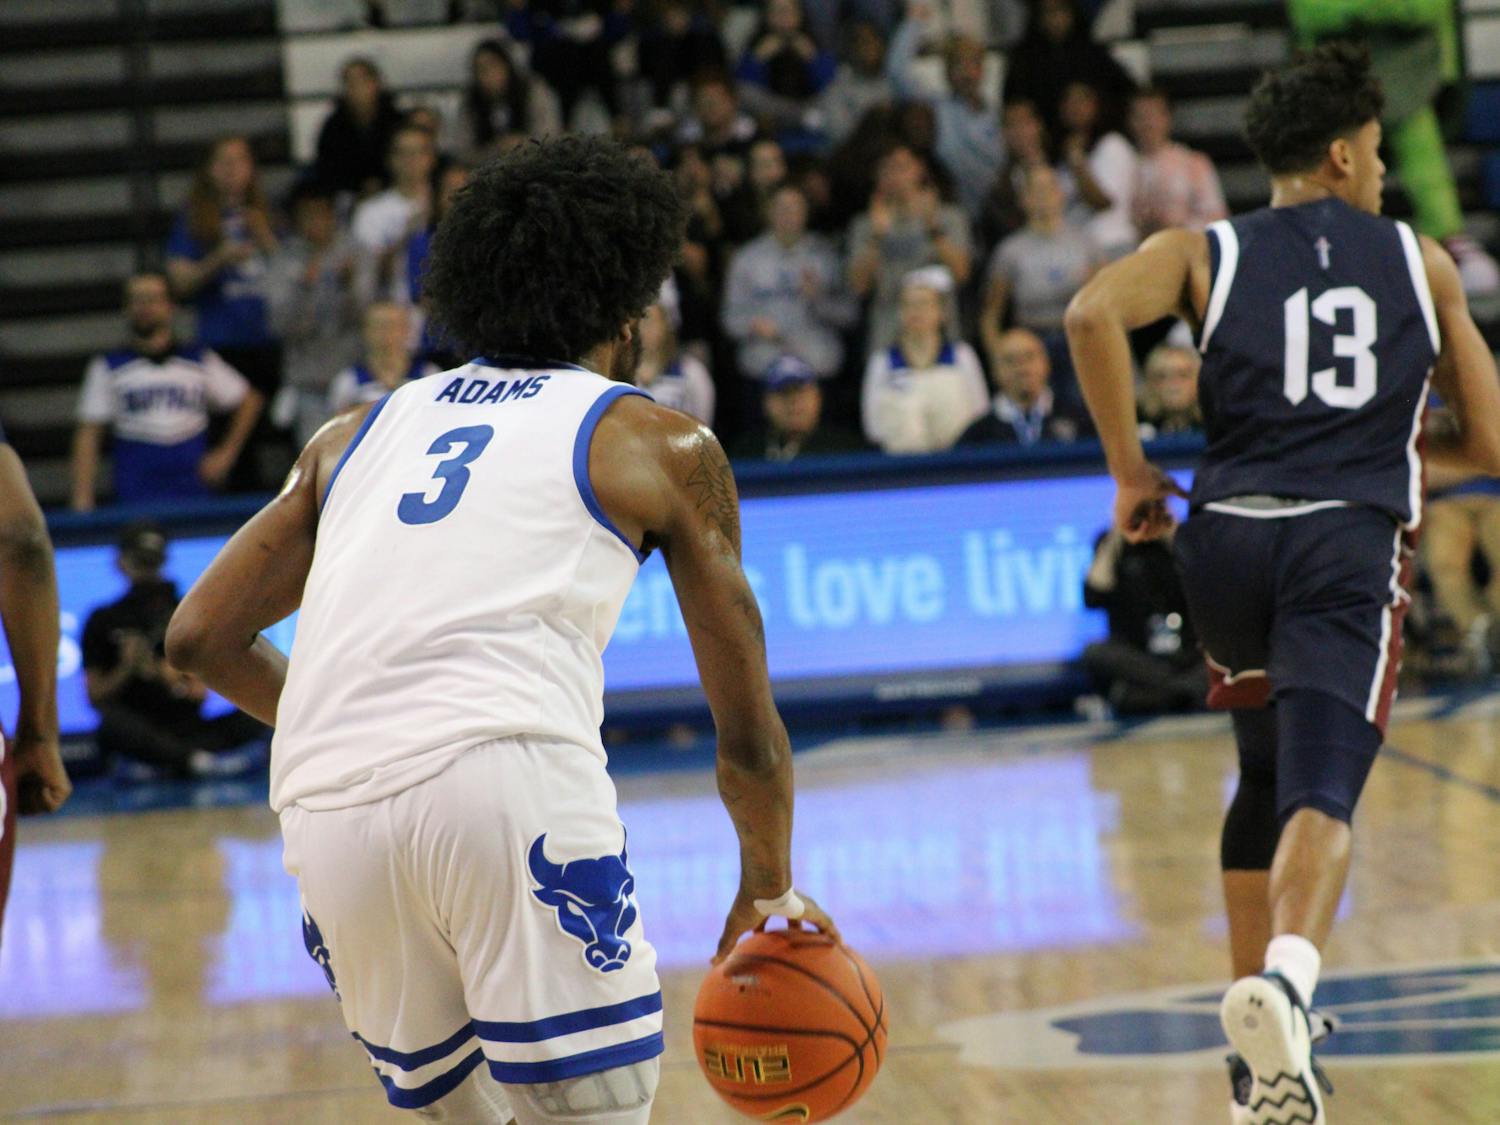 Big plays from senior forward Isaiah Adam — including a big three-pointer that tied the game at 15 midway through the first — helped UB but ultimately weren't enough.&nbsp;